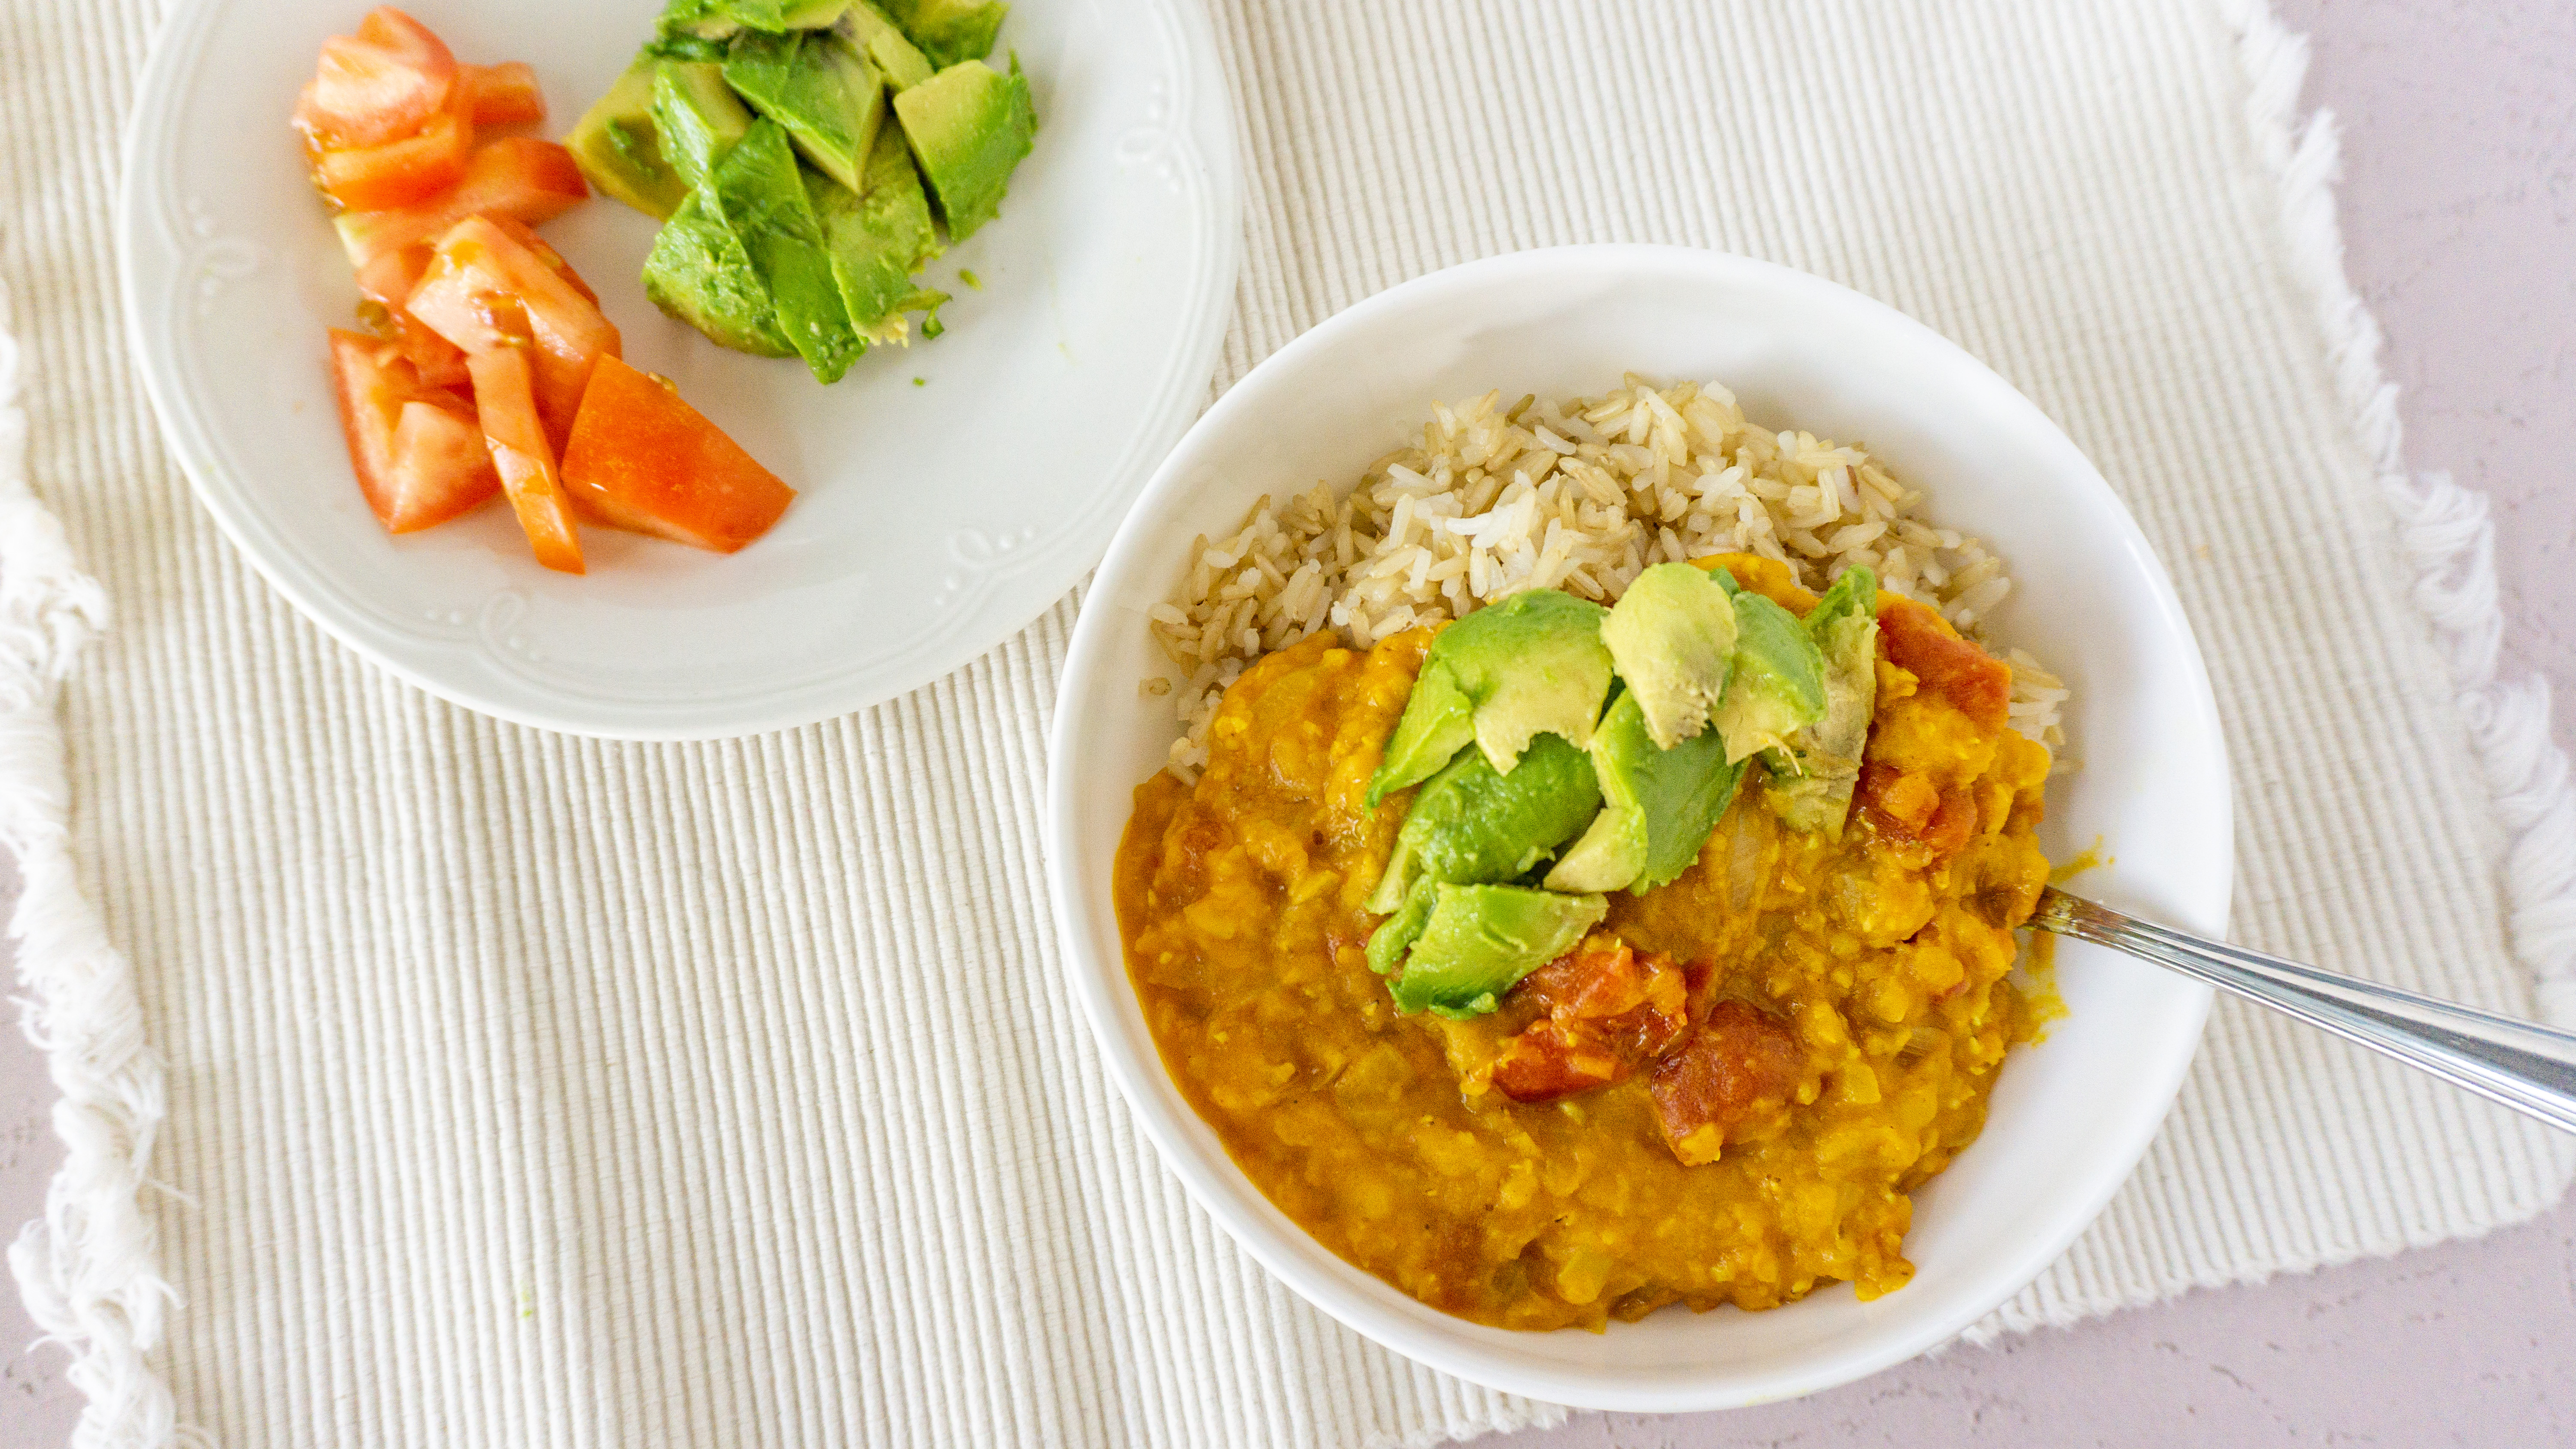 lentil curry on rice in a white bowl with tomatoes and avocado on the side